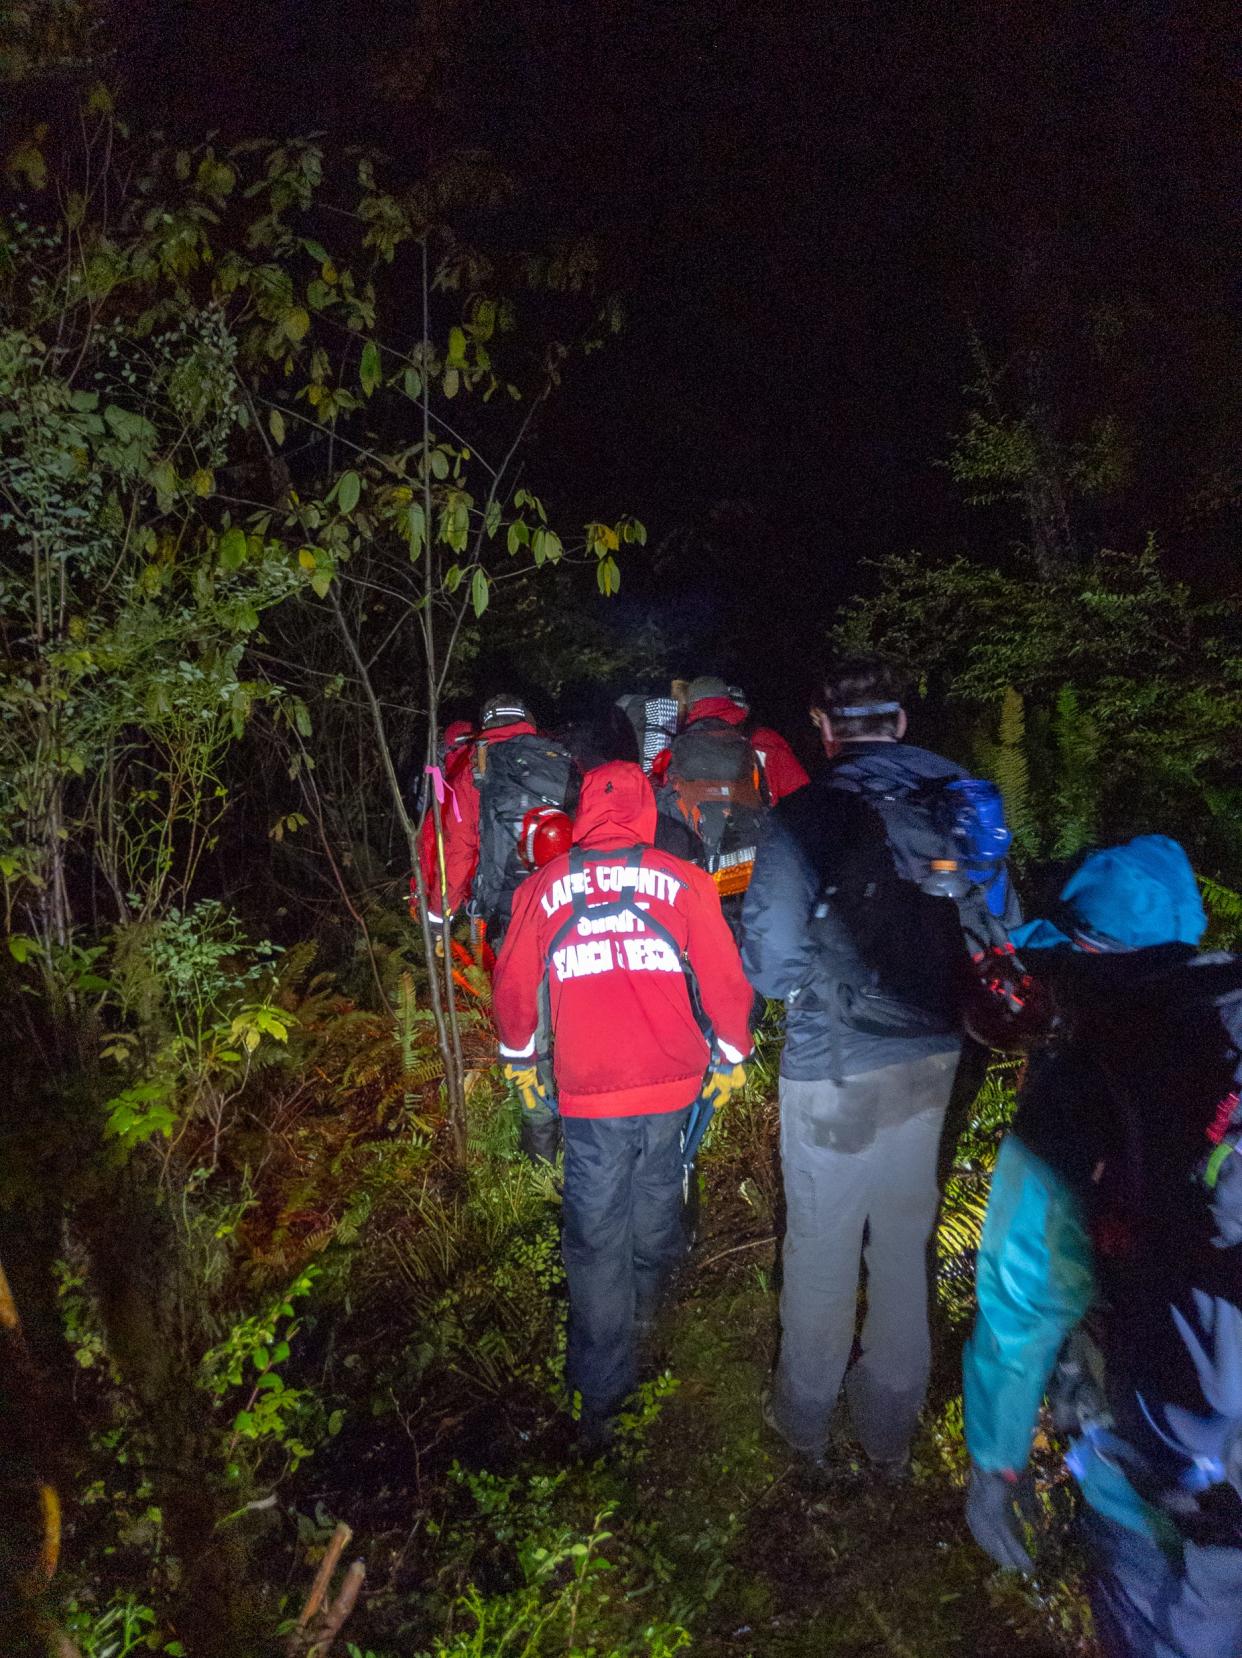 Lane County Search and Rescue Team personnel stabilize a woman found near Herman Peak Road northeast of Florence.